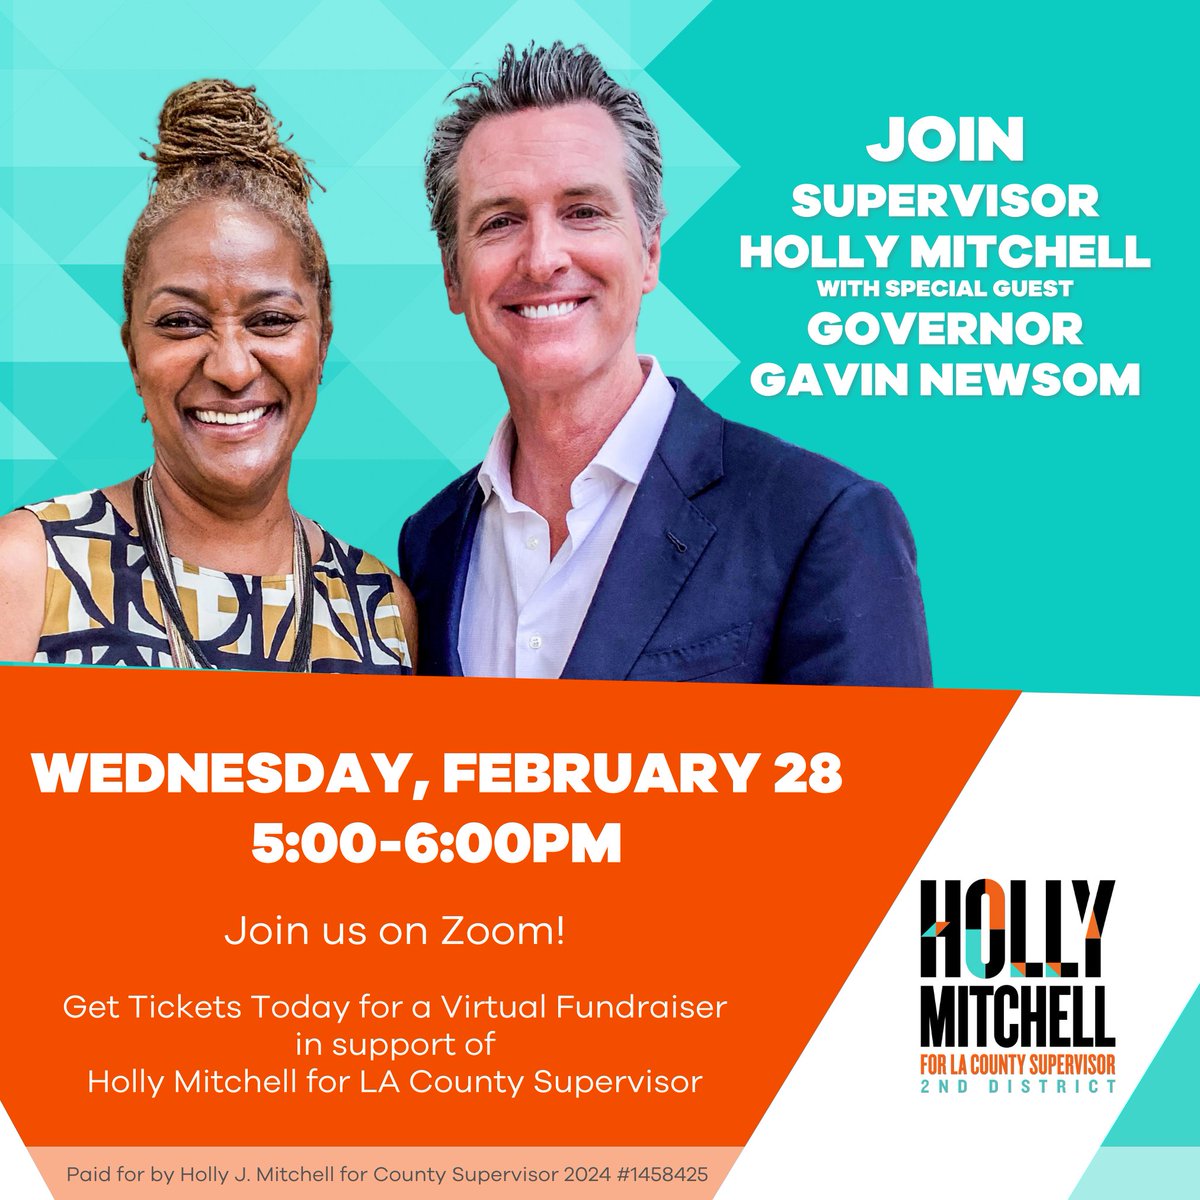 Join special guest Governor @GavinNewsom in supporting Holly for Supervisor! Get your ticket now for this special virtual event on February 28. We can’t wait to see you there! bit.ly/HollyandGavin